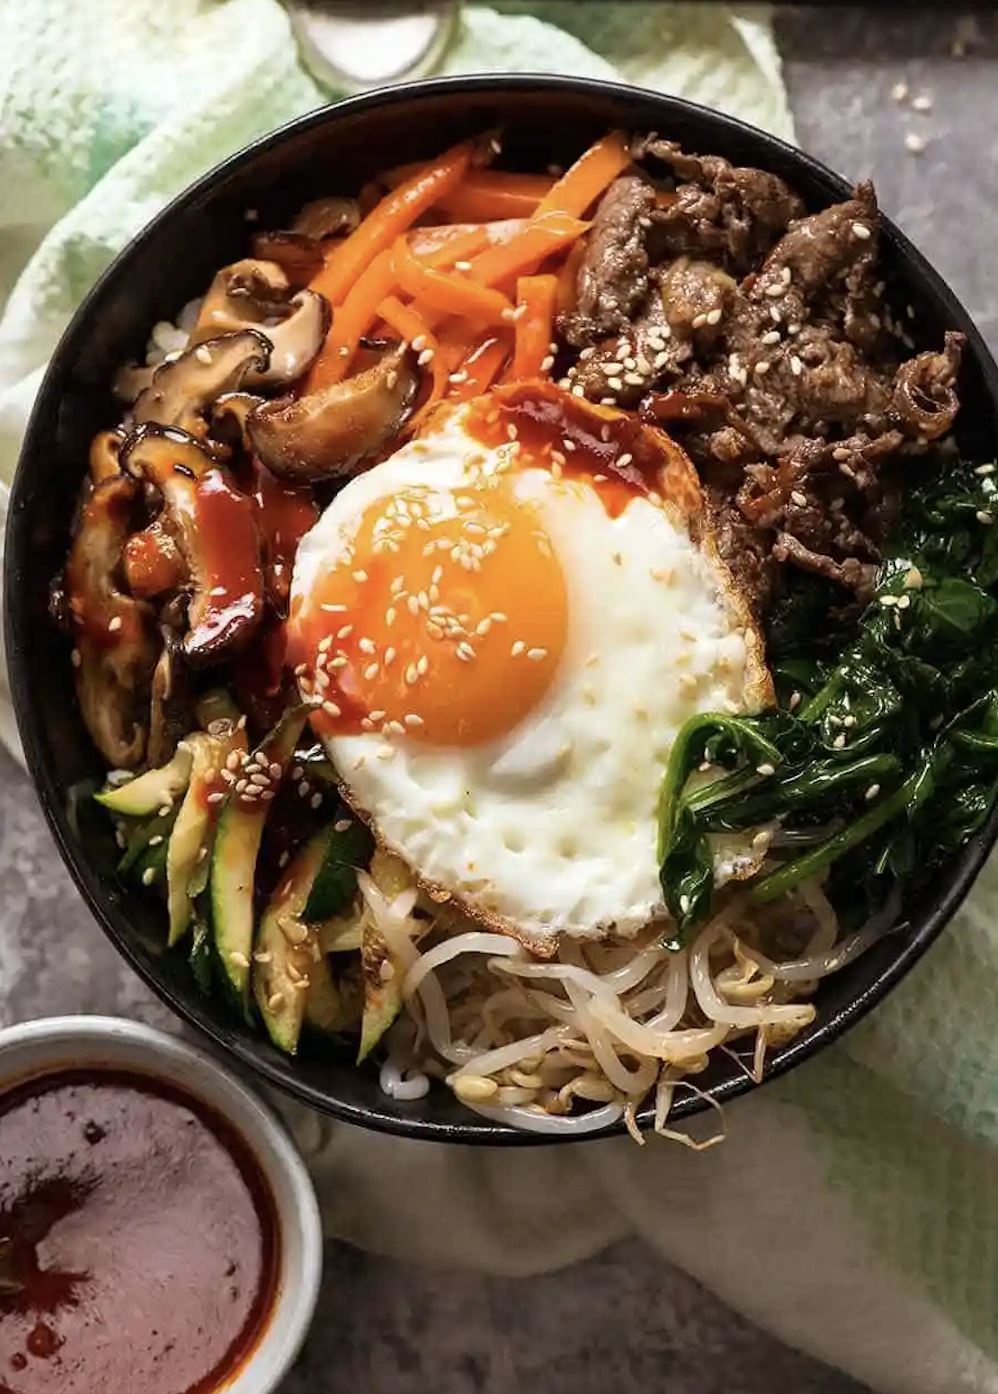 A bowl of bibimbap with beef, assorted vegetables, a fried egg on top, and sauce on the side